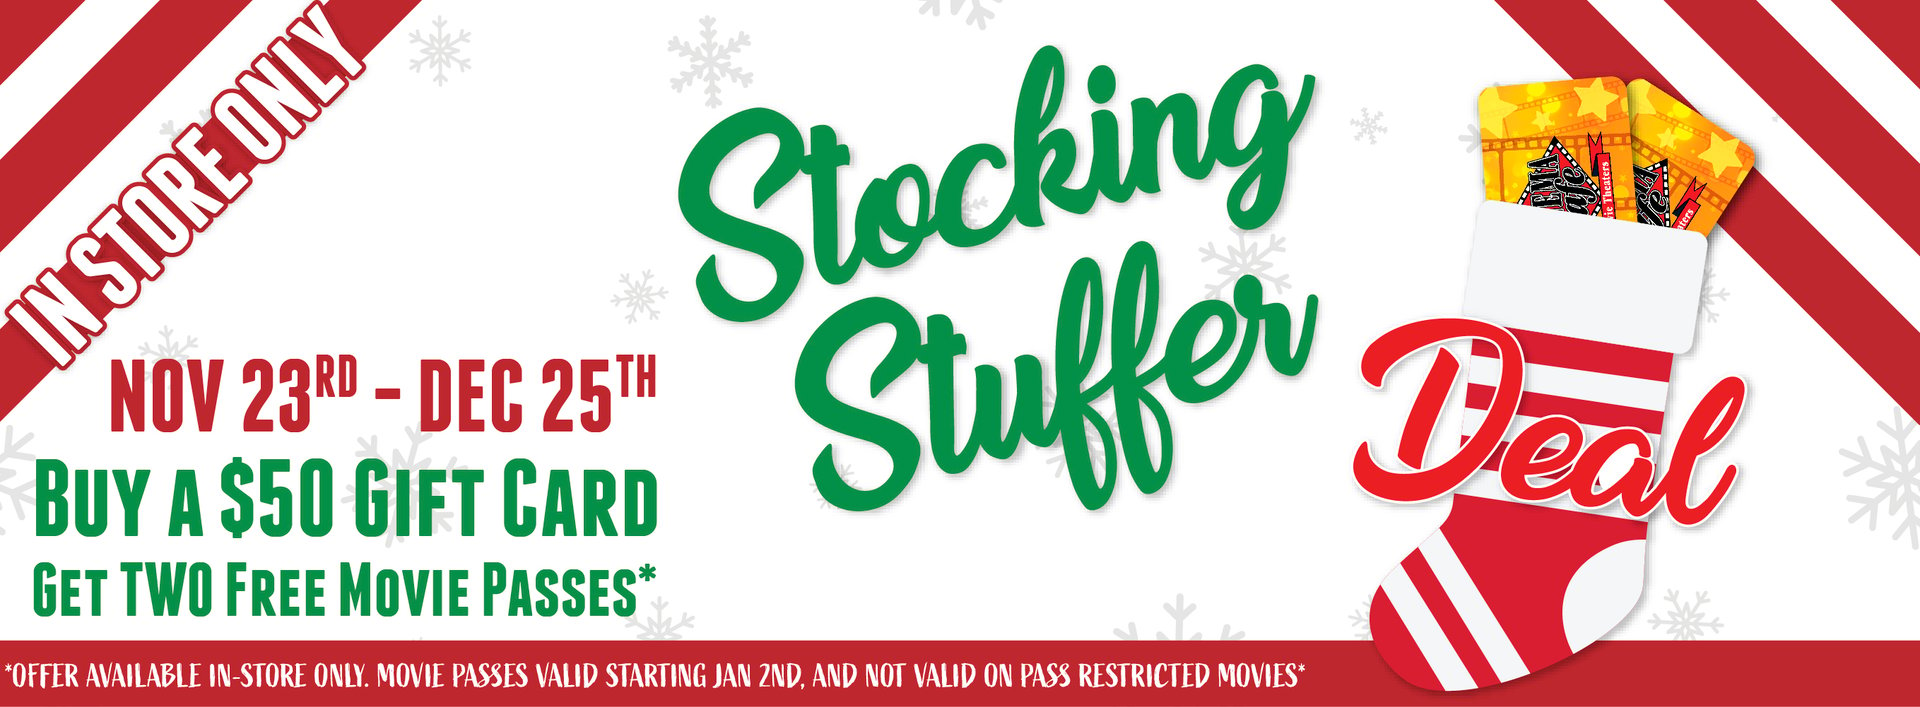 Stocking Stuffer Deal Available In-Store Only